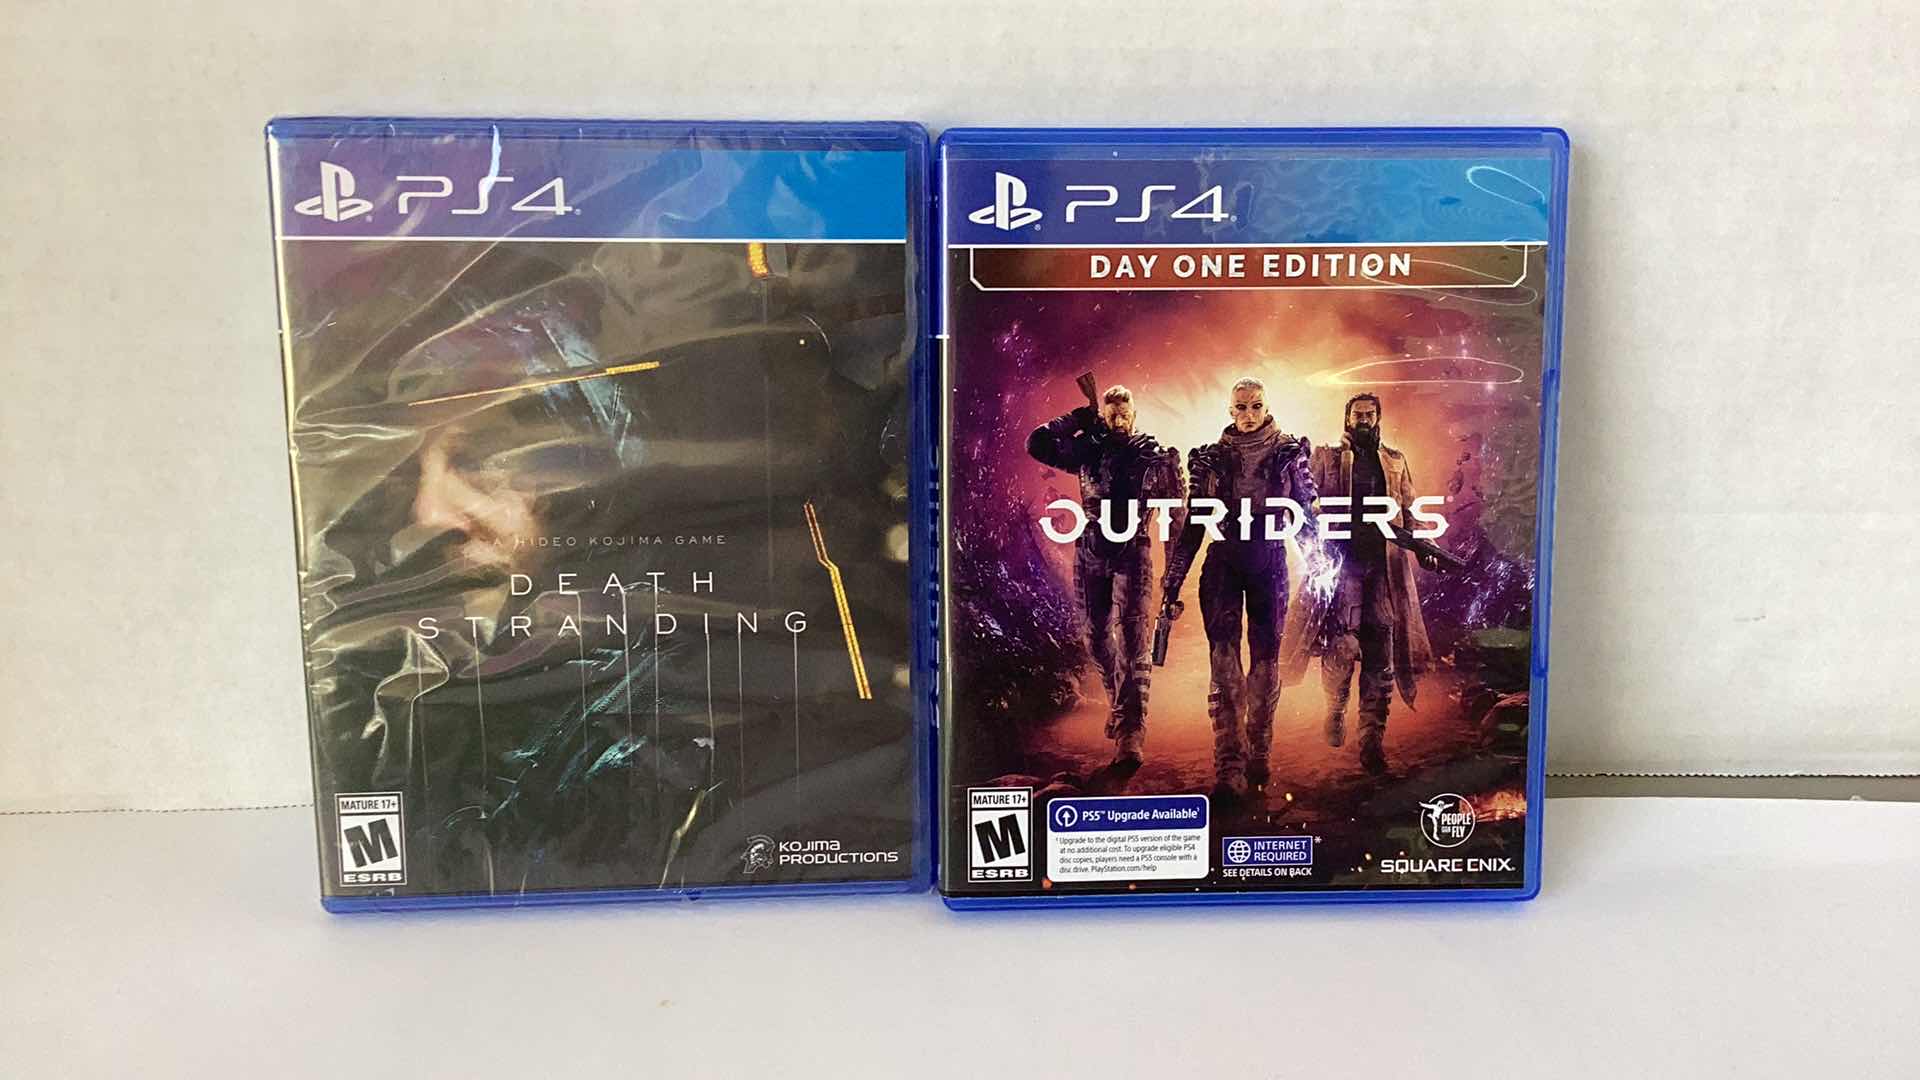 Photo 1 of 2 NEW PS4 GAMES: DEATH STRANDING AND OUTRIDERS